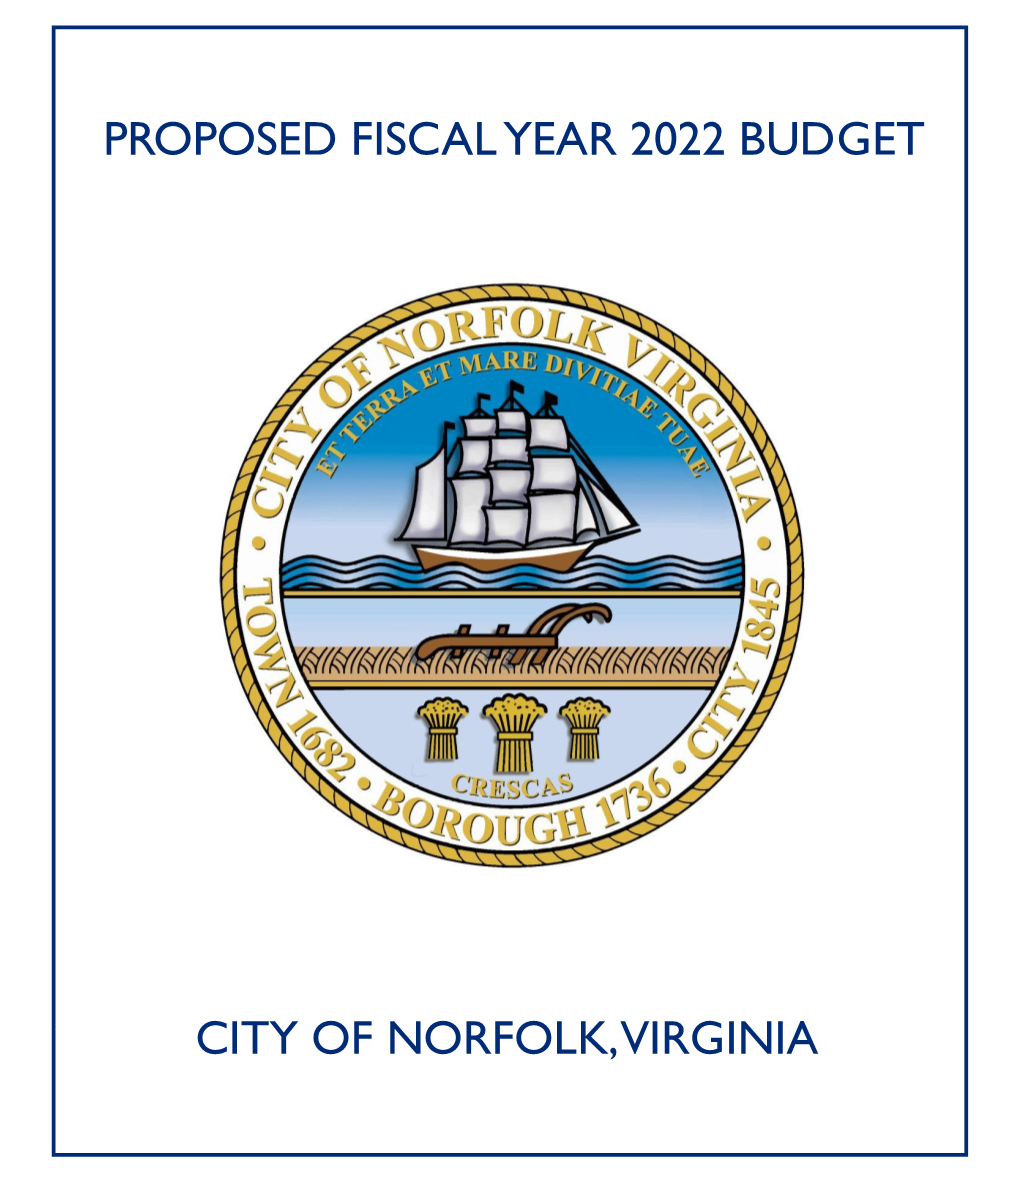 Proposed Fiscal Year 2022 Budget City of Norfolk, Virginia